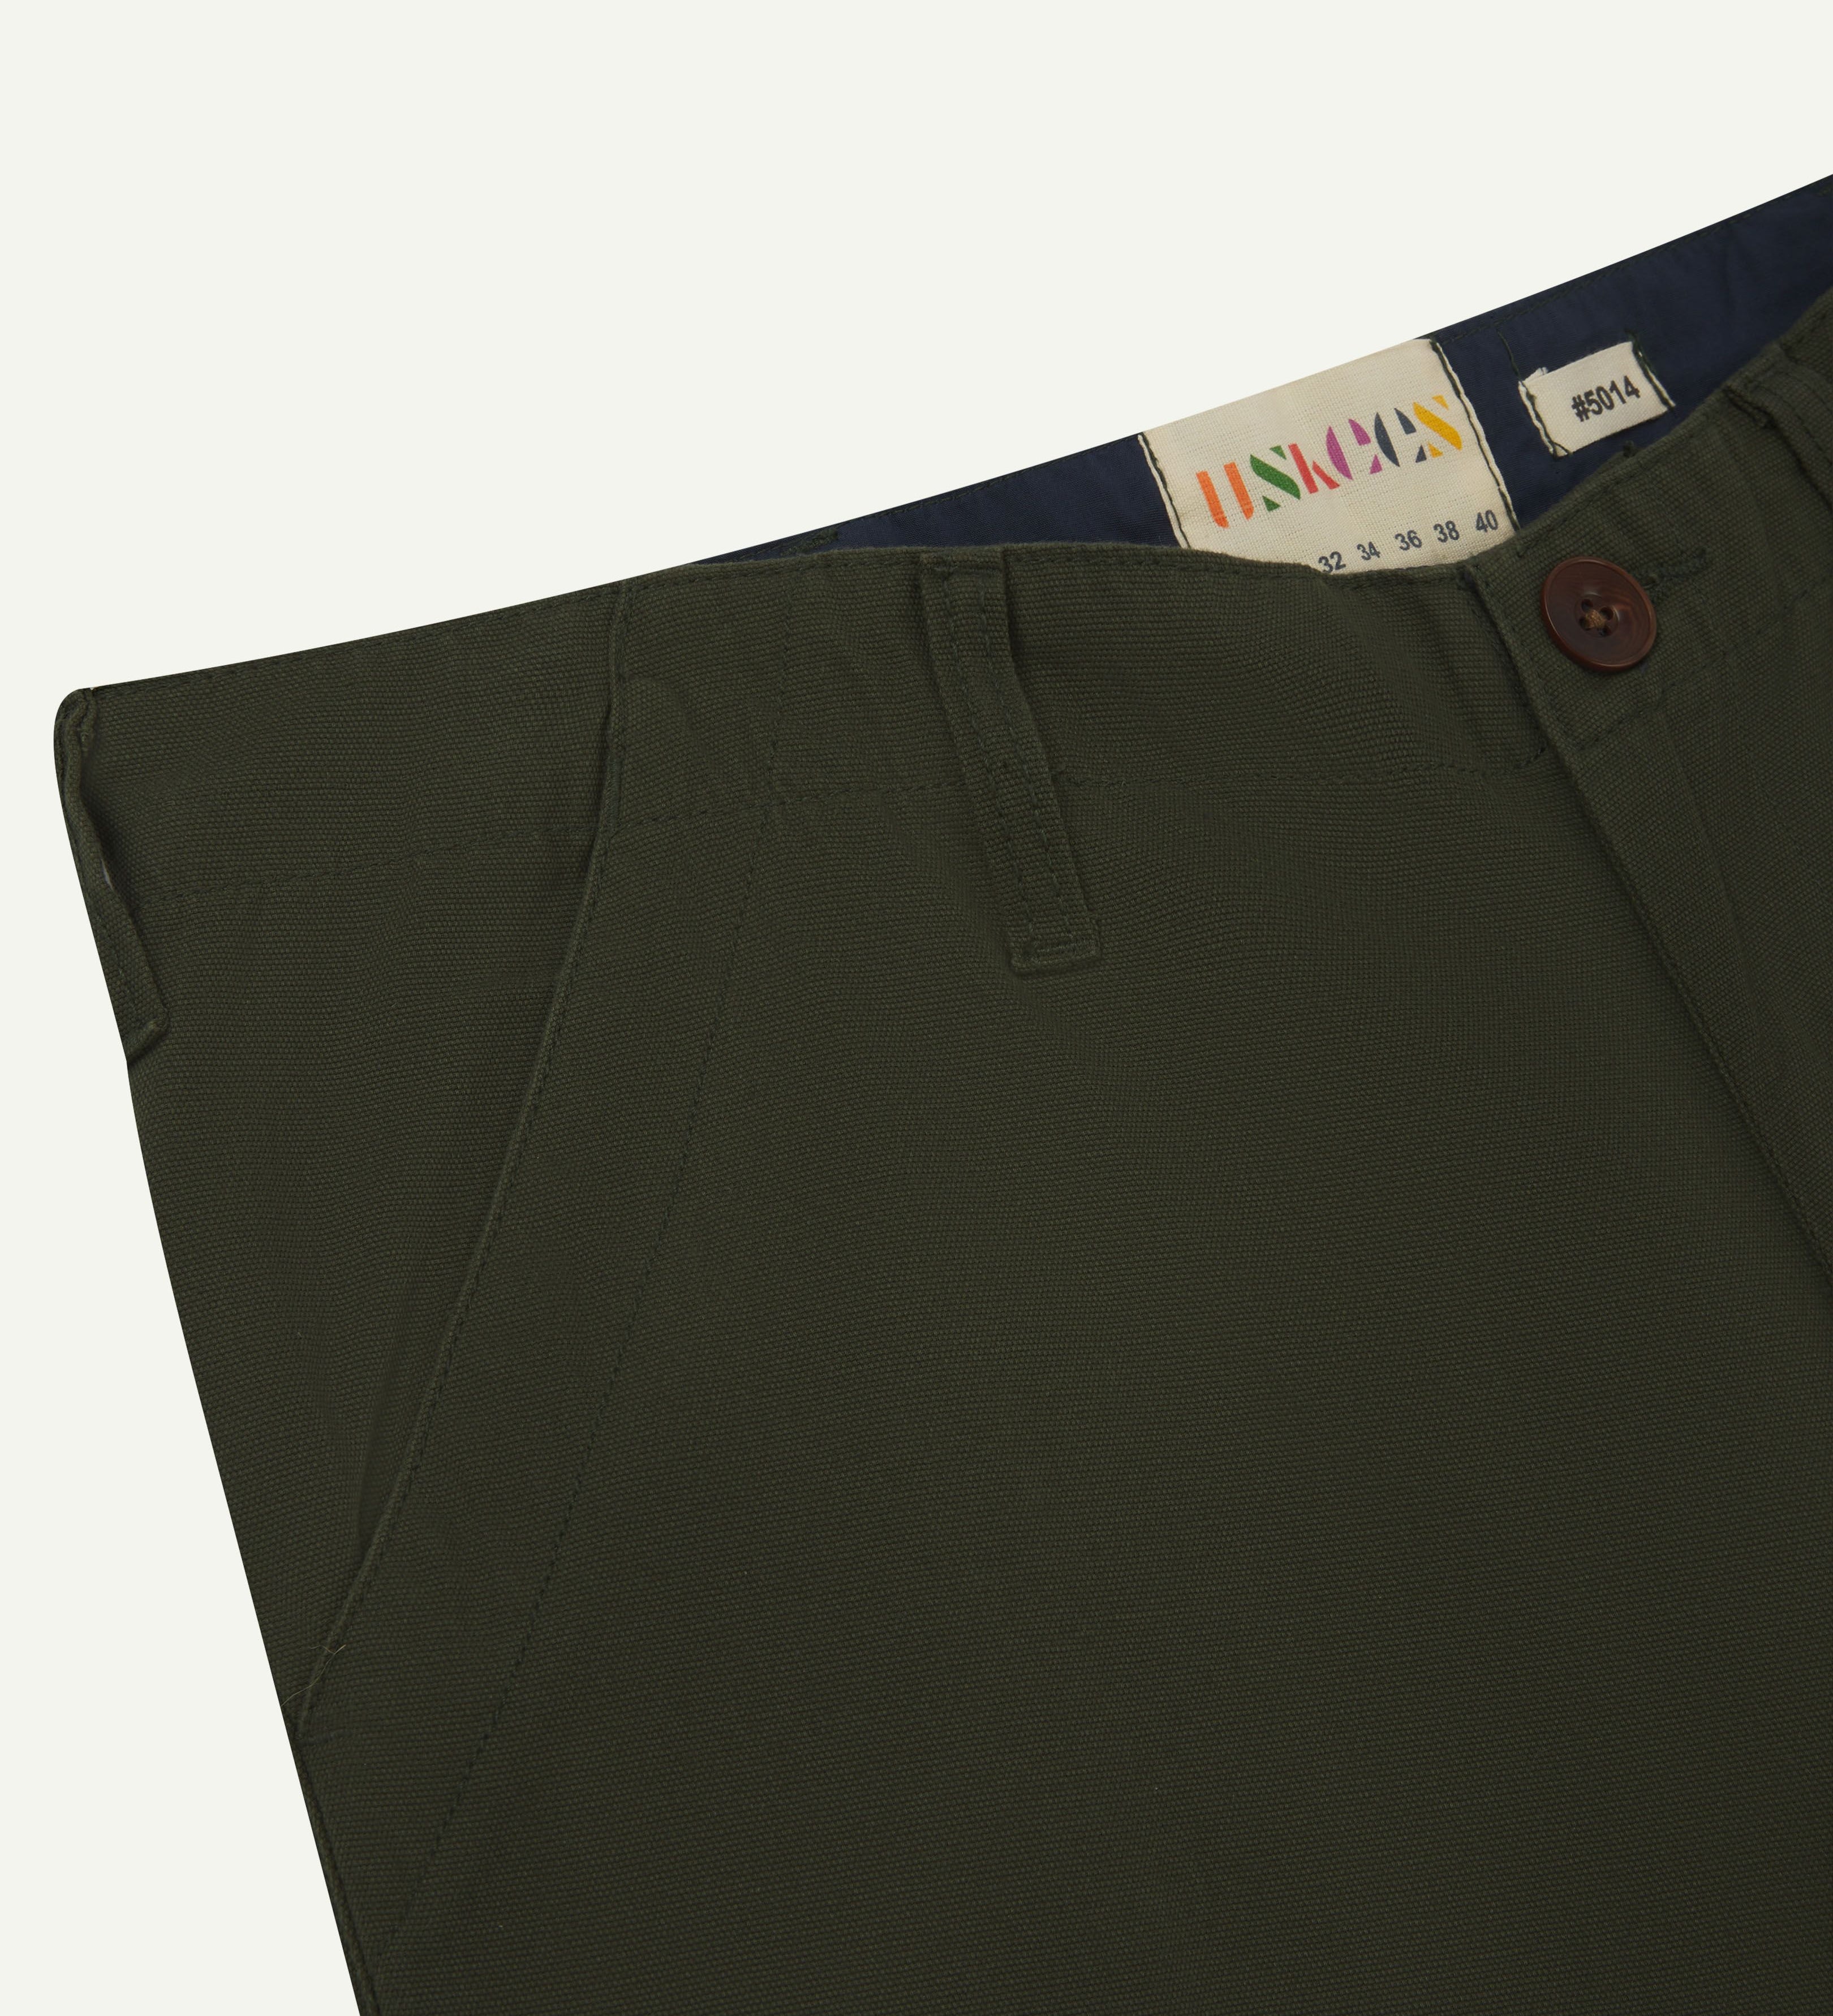 Close up view of #5014 Uskees men's organic cotton 'vine green' cargo trousers showing size label and front pocket